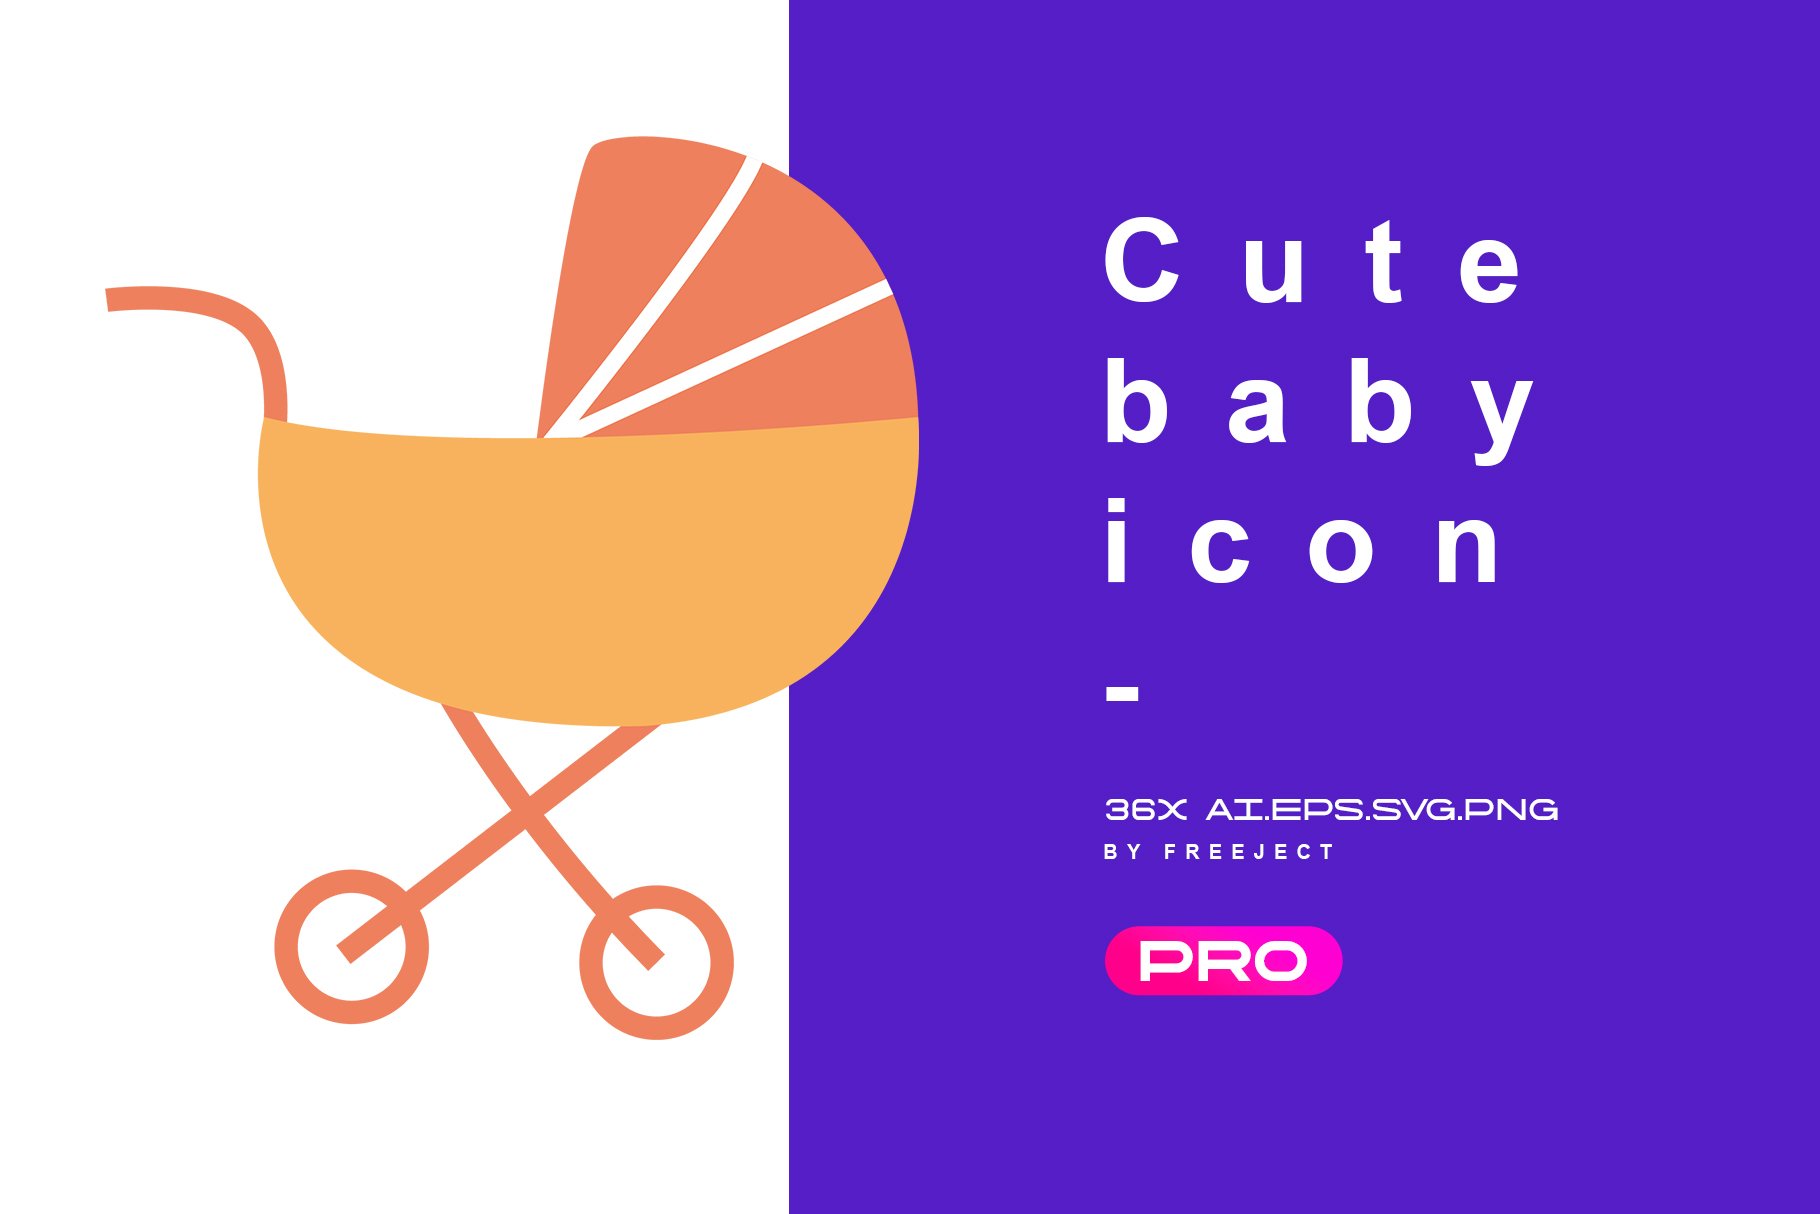 Cute Baby Icon Illustration Design cover image.